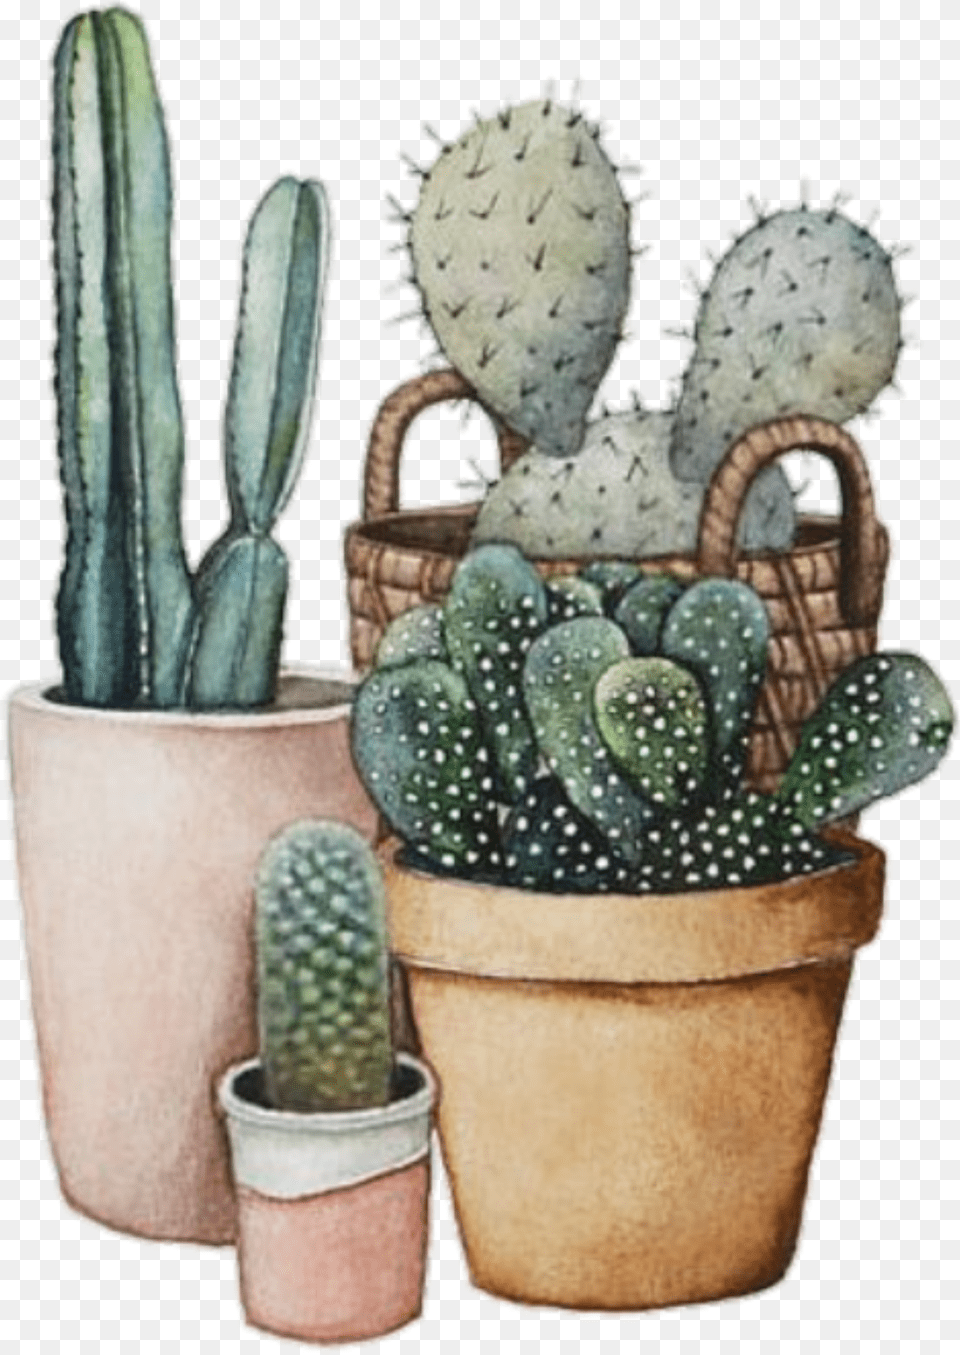 Cactus Tumblr Cool Interesting Art Nature Green Watercolor Painting, Plant, Potted Plant Free Png